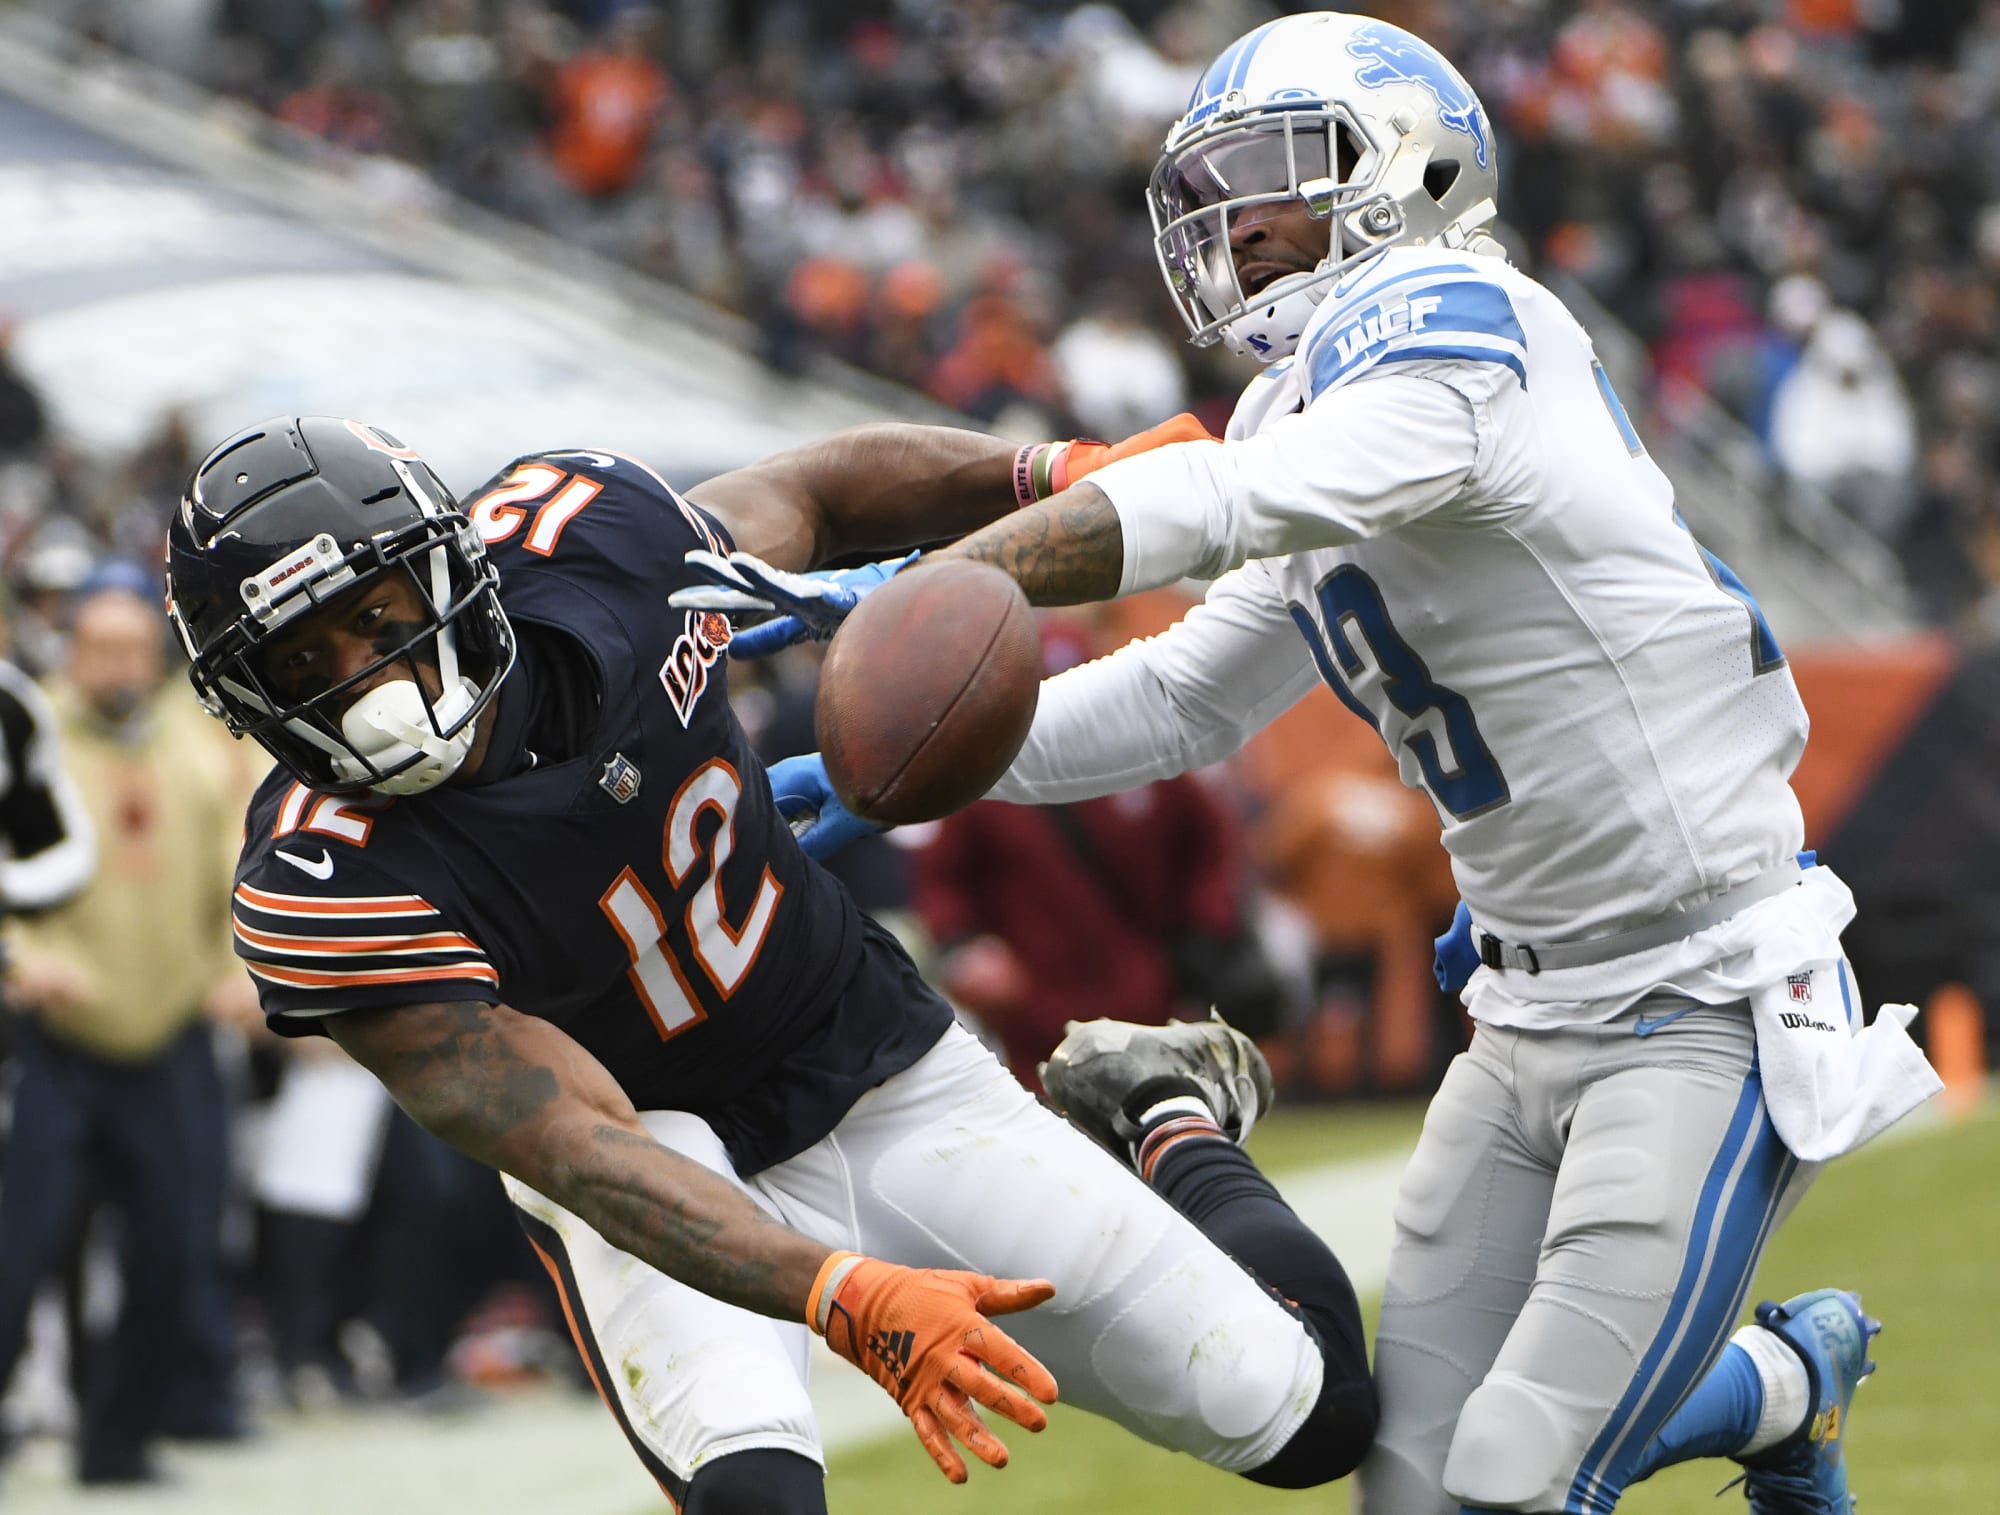 Chicago Bears vs. Detroit Lions Game details, live stream and more